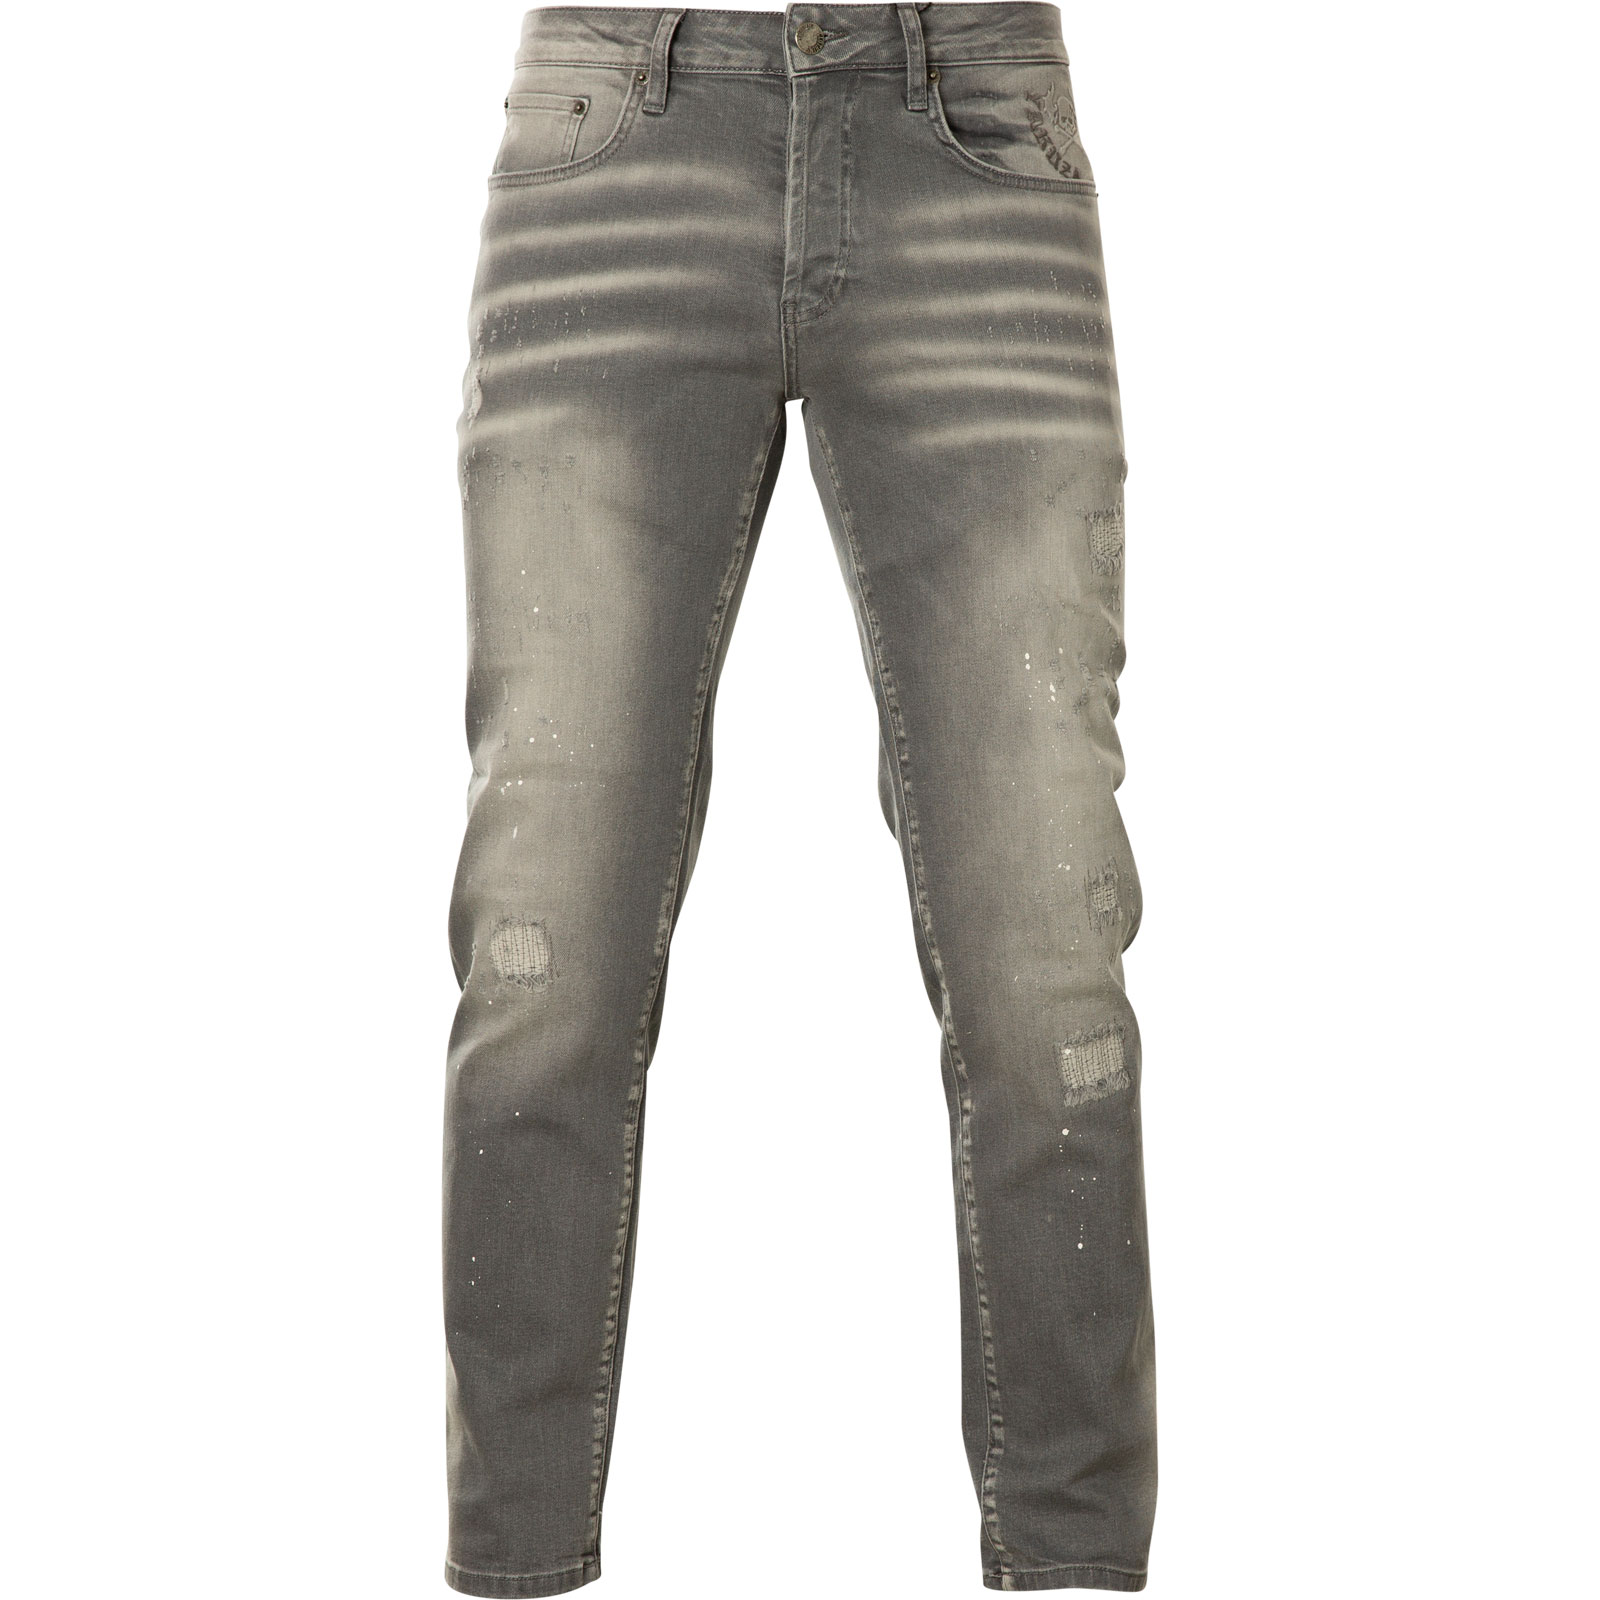 Yakuza Destroyer Straight Jeans JEB-15044 with lots of colourful splotches